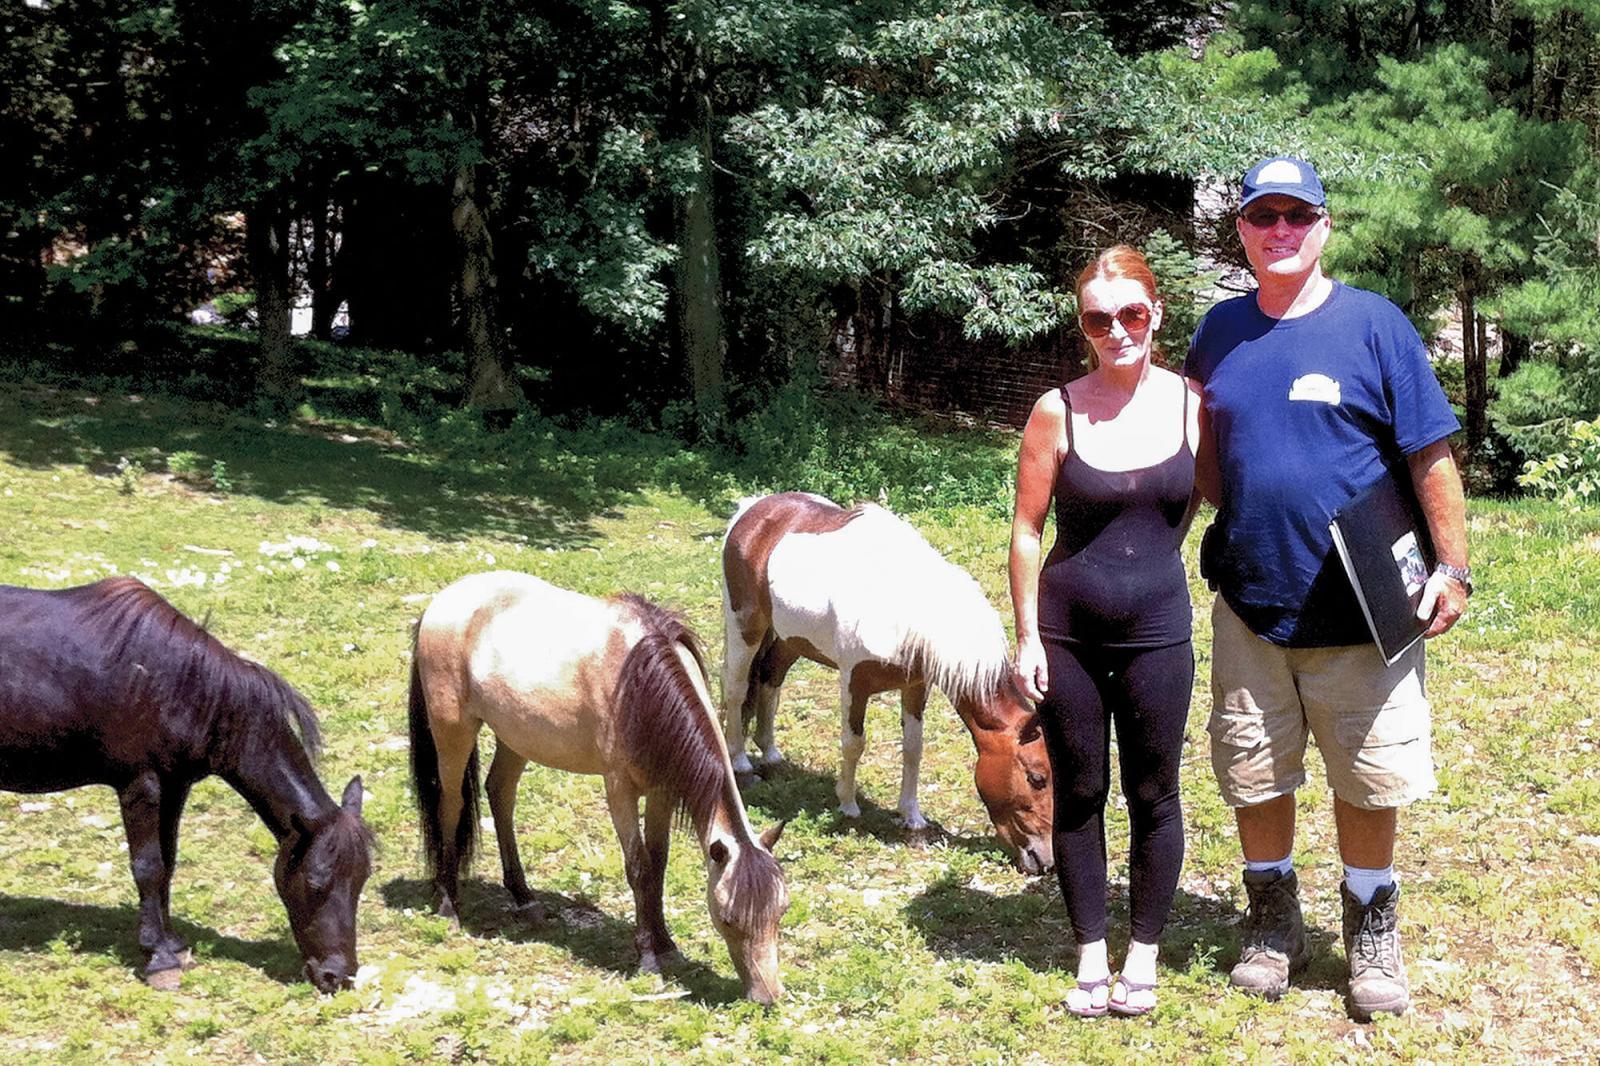 Derek Geddes of Coldstream Land Escape Company in London and his wife enjoy raising miniature horses. Geddes is a director on the London Chapter Board.